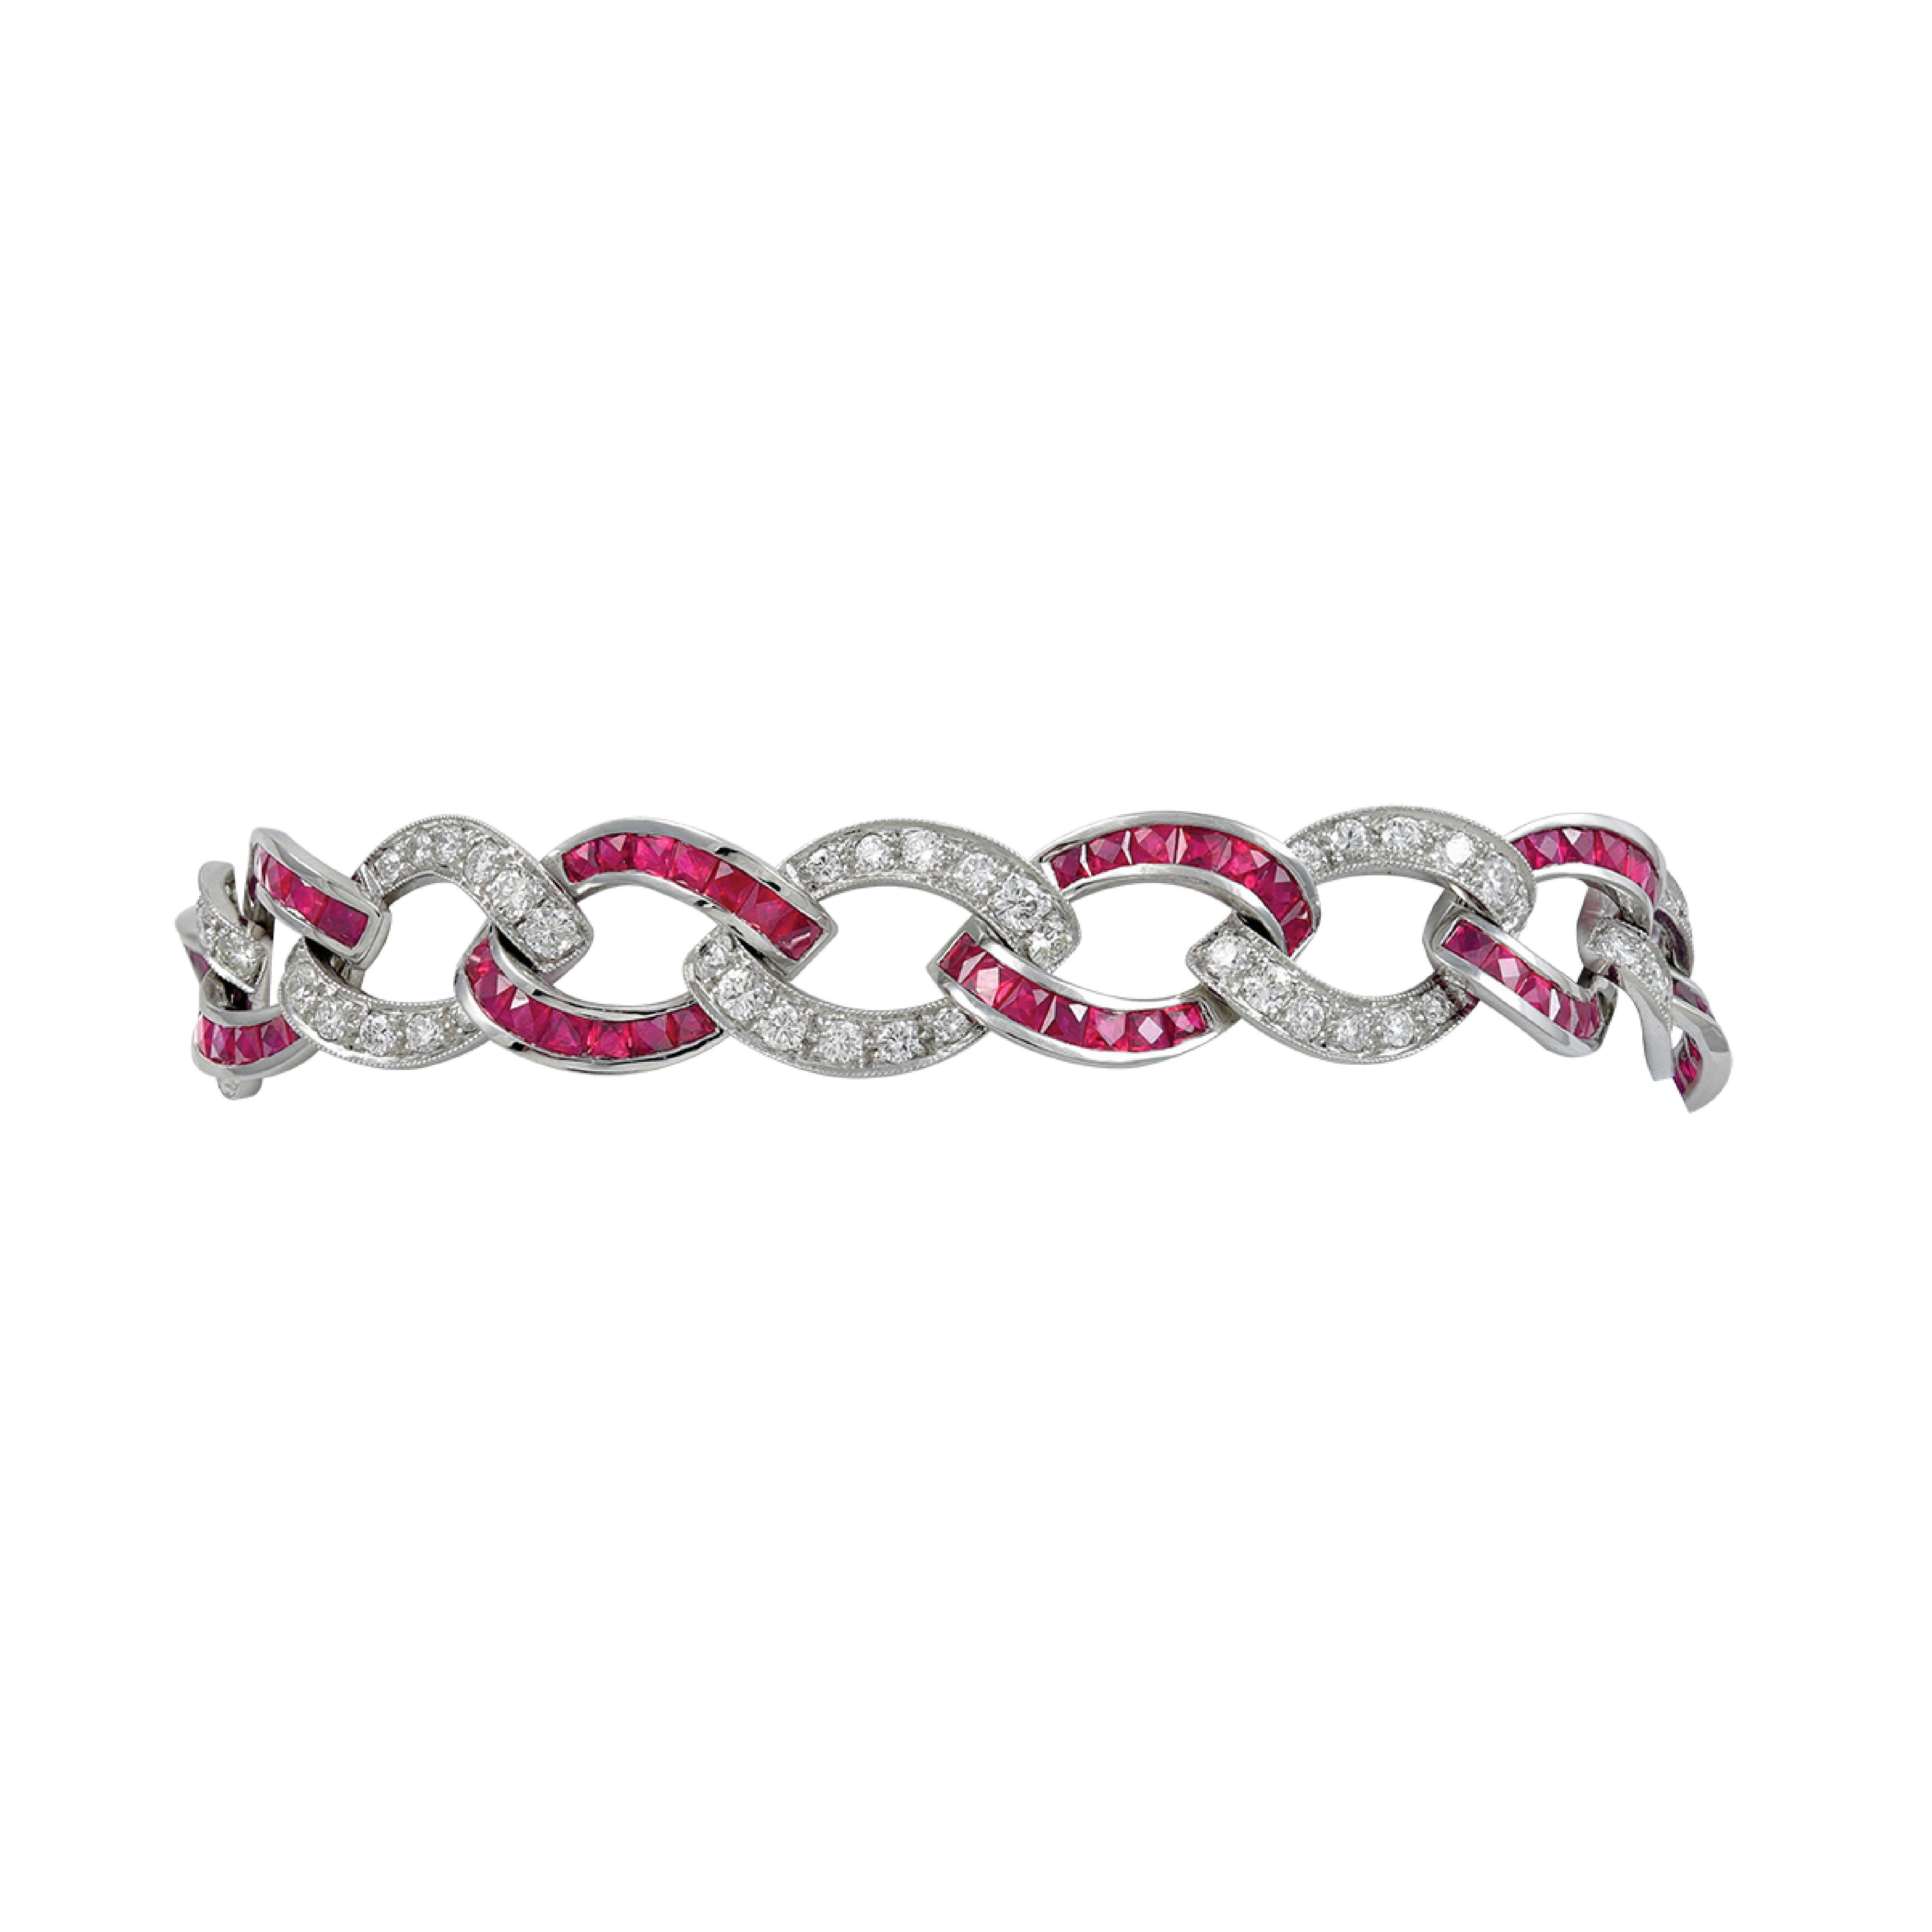 8.97 carats of rubies and 4.06 carats of diamonds link bracelet set in platinum.

Sophia D by Joseph Dardashti LTD has been known worldwide for 35 years and are inspired by classic Art Deco design that merges with modern manufacturing techniques.

